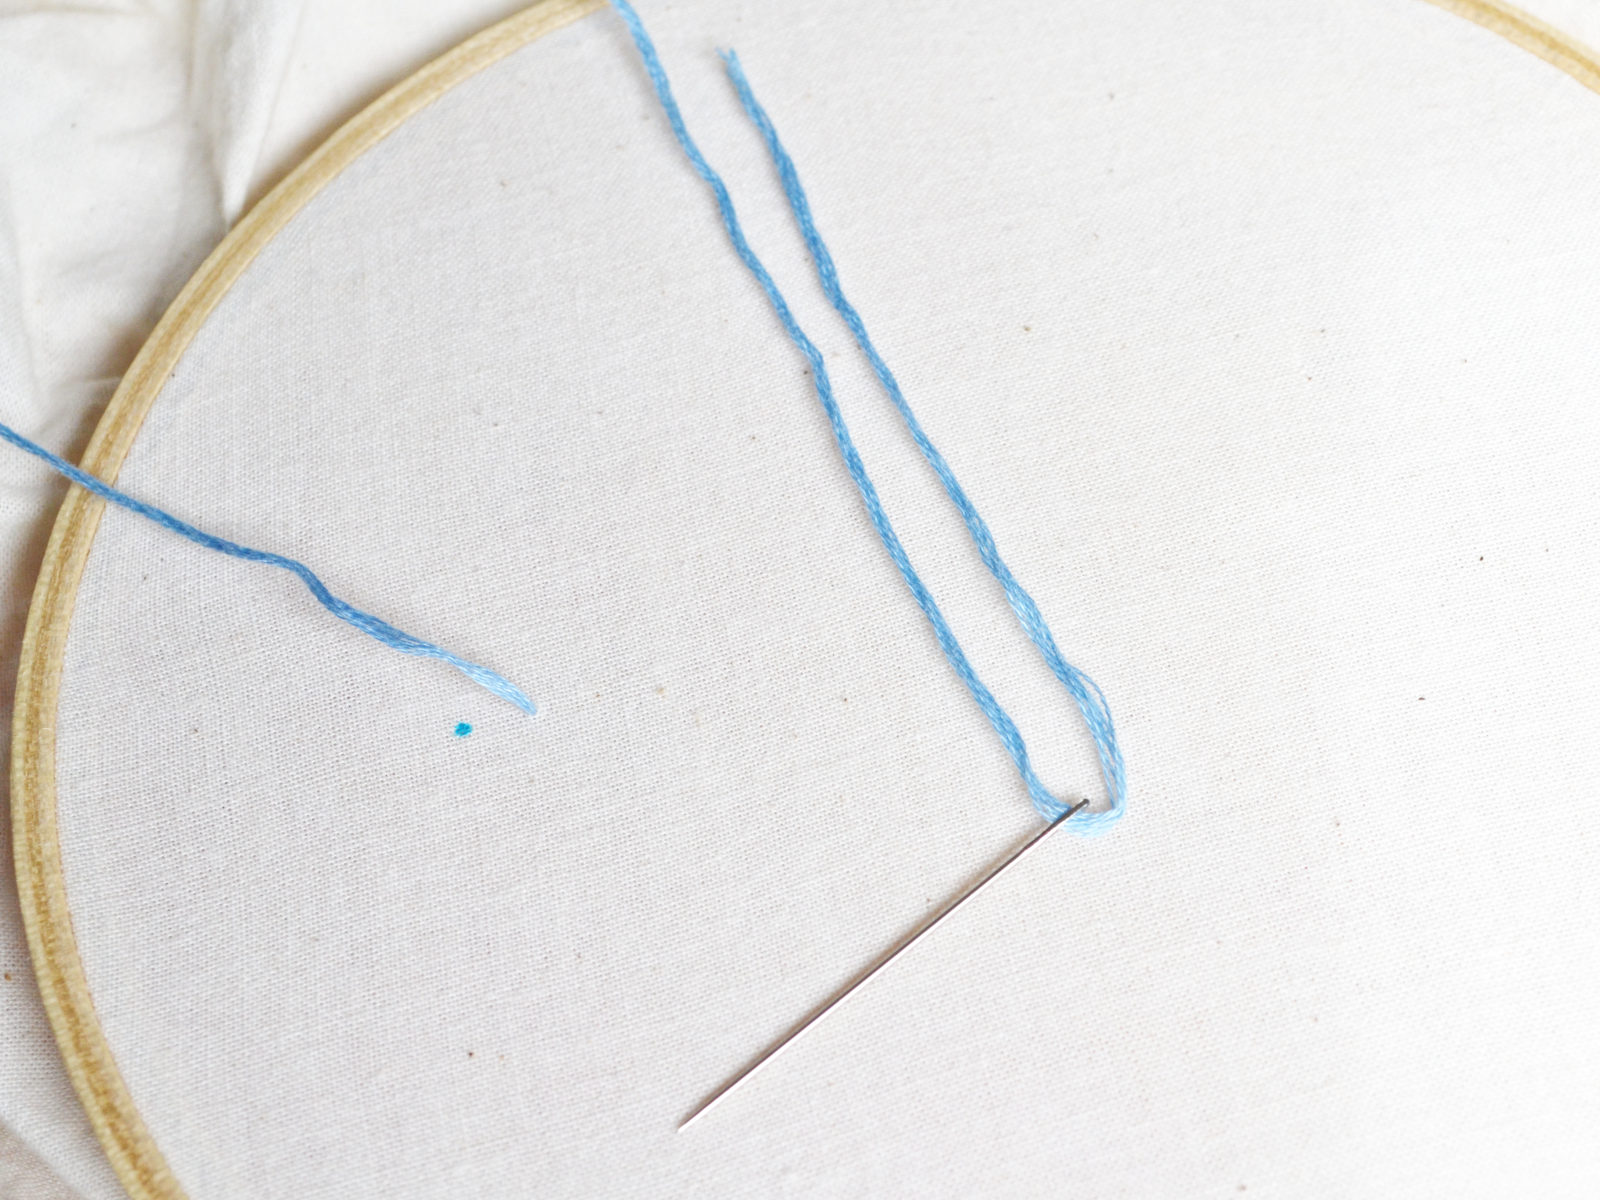 beginning a backstitch with needle and hoop